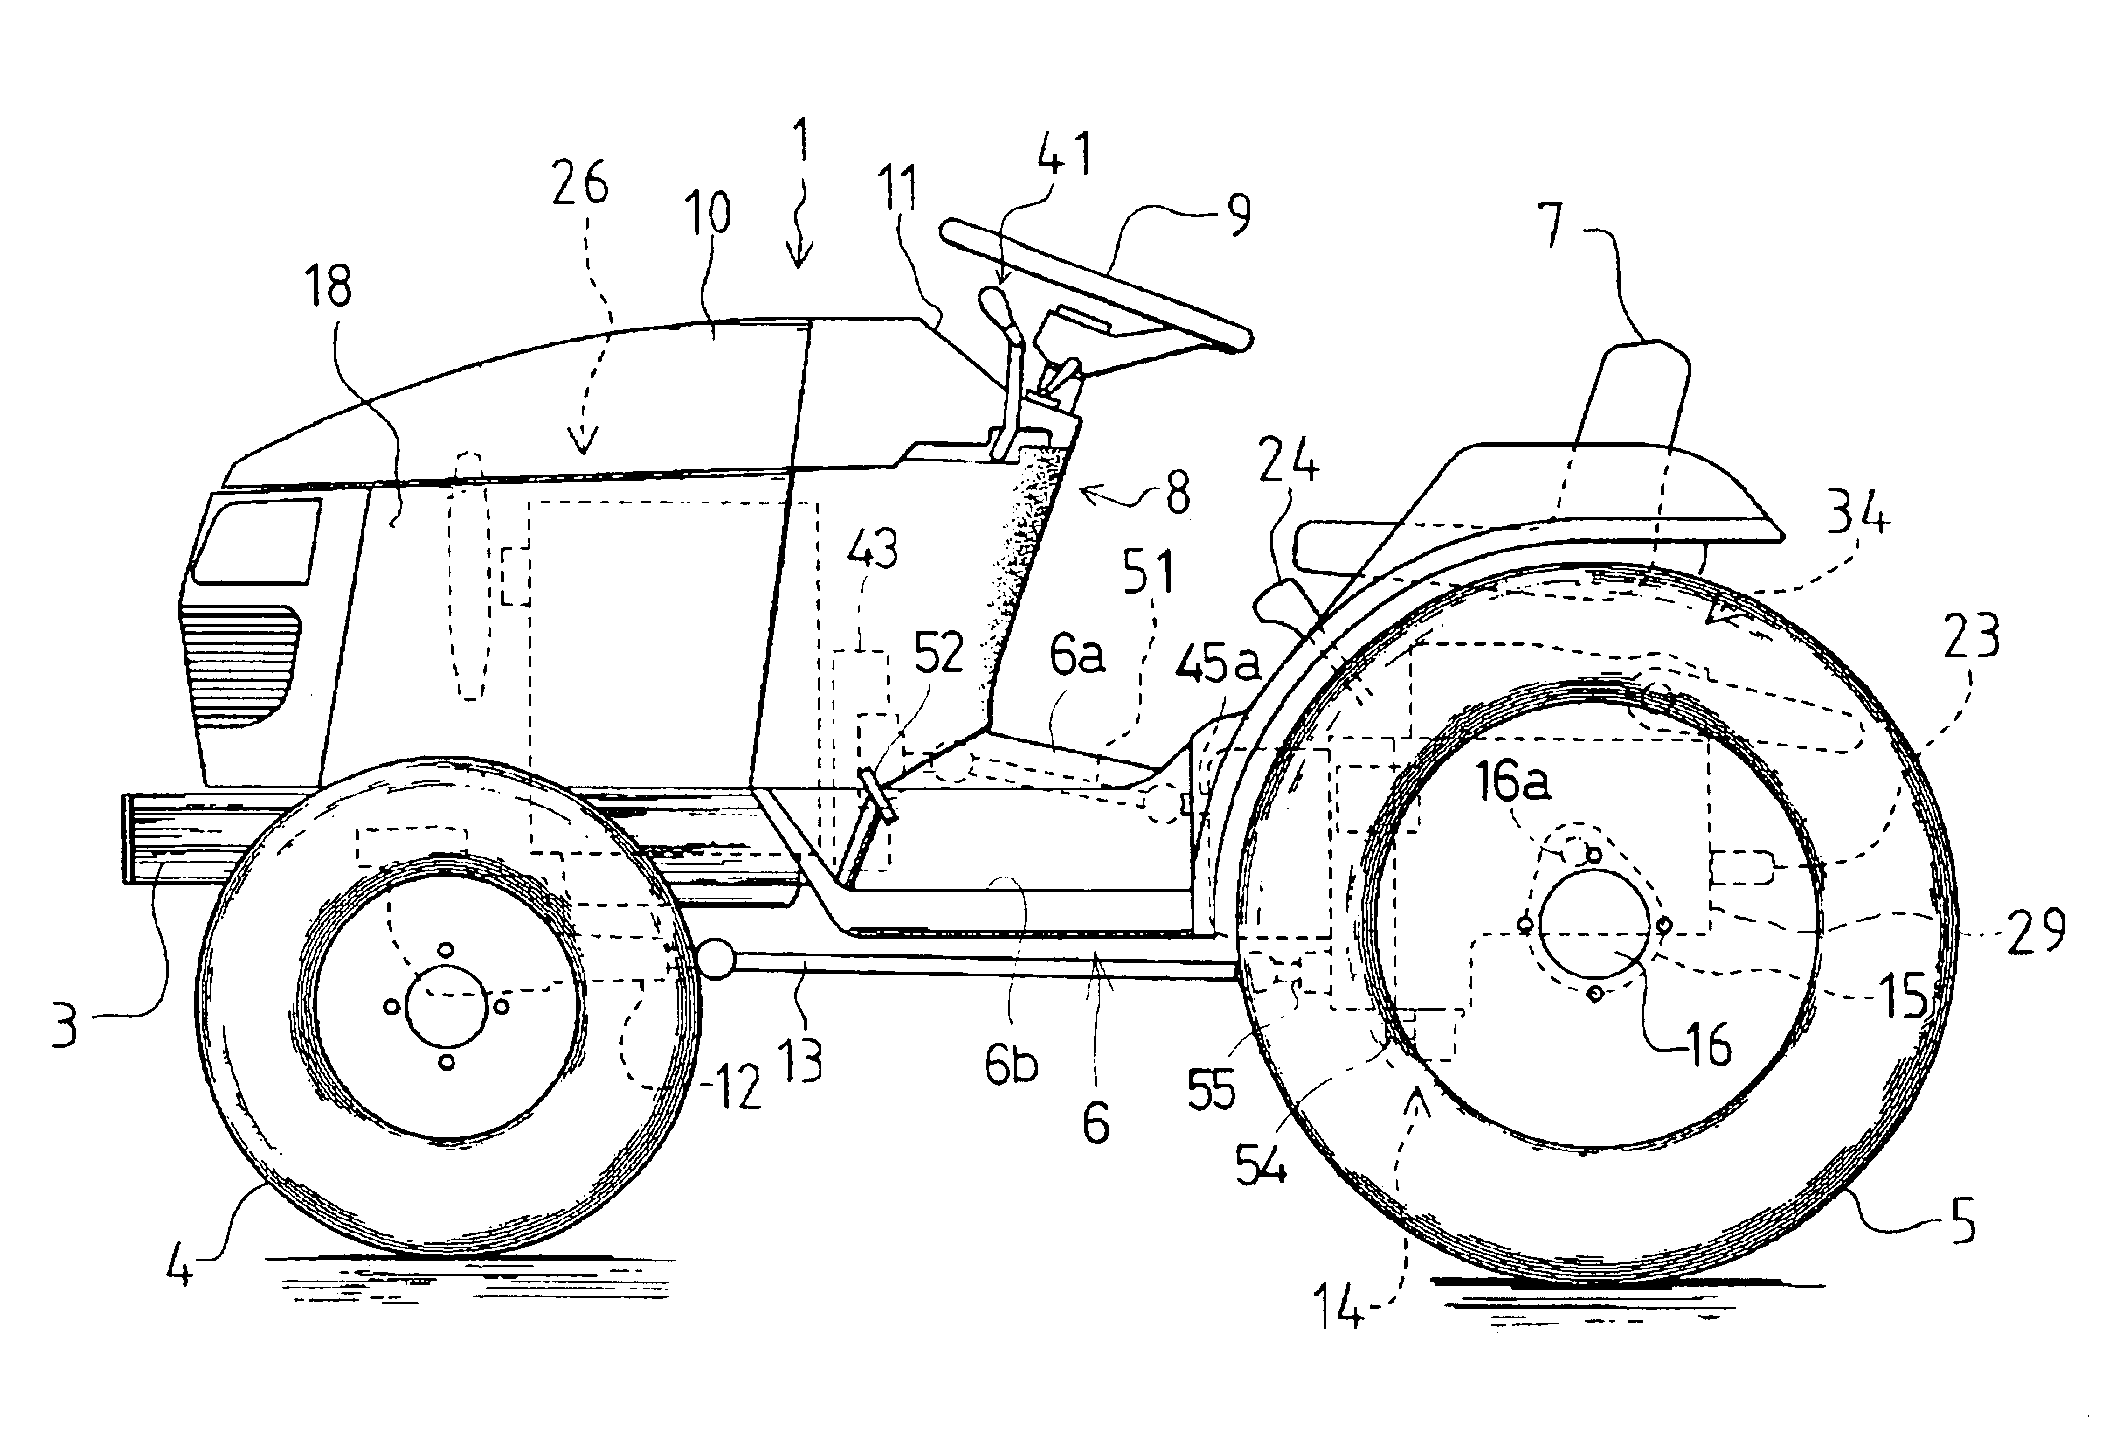 Body frame of a riding tractor